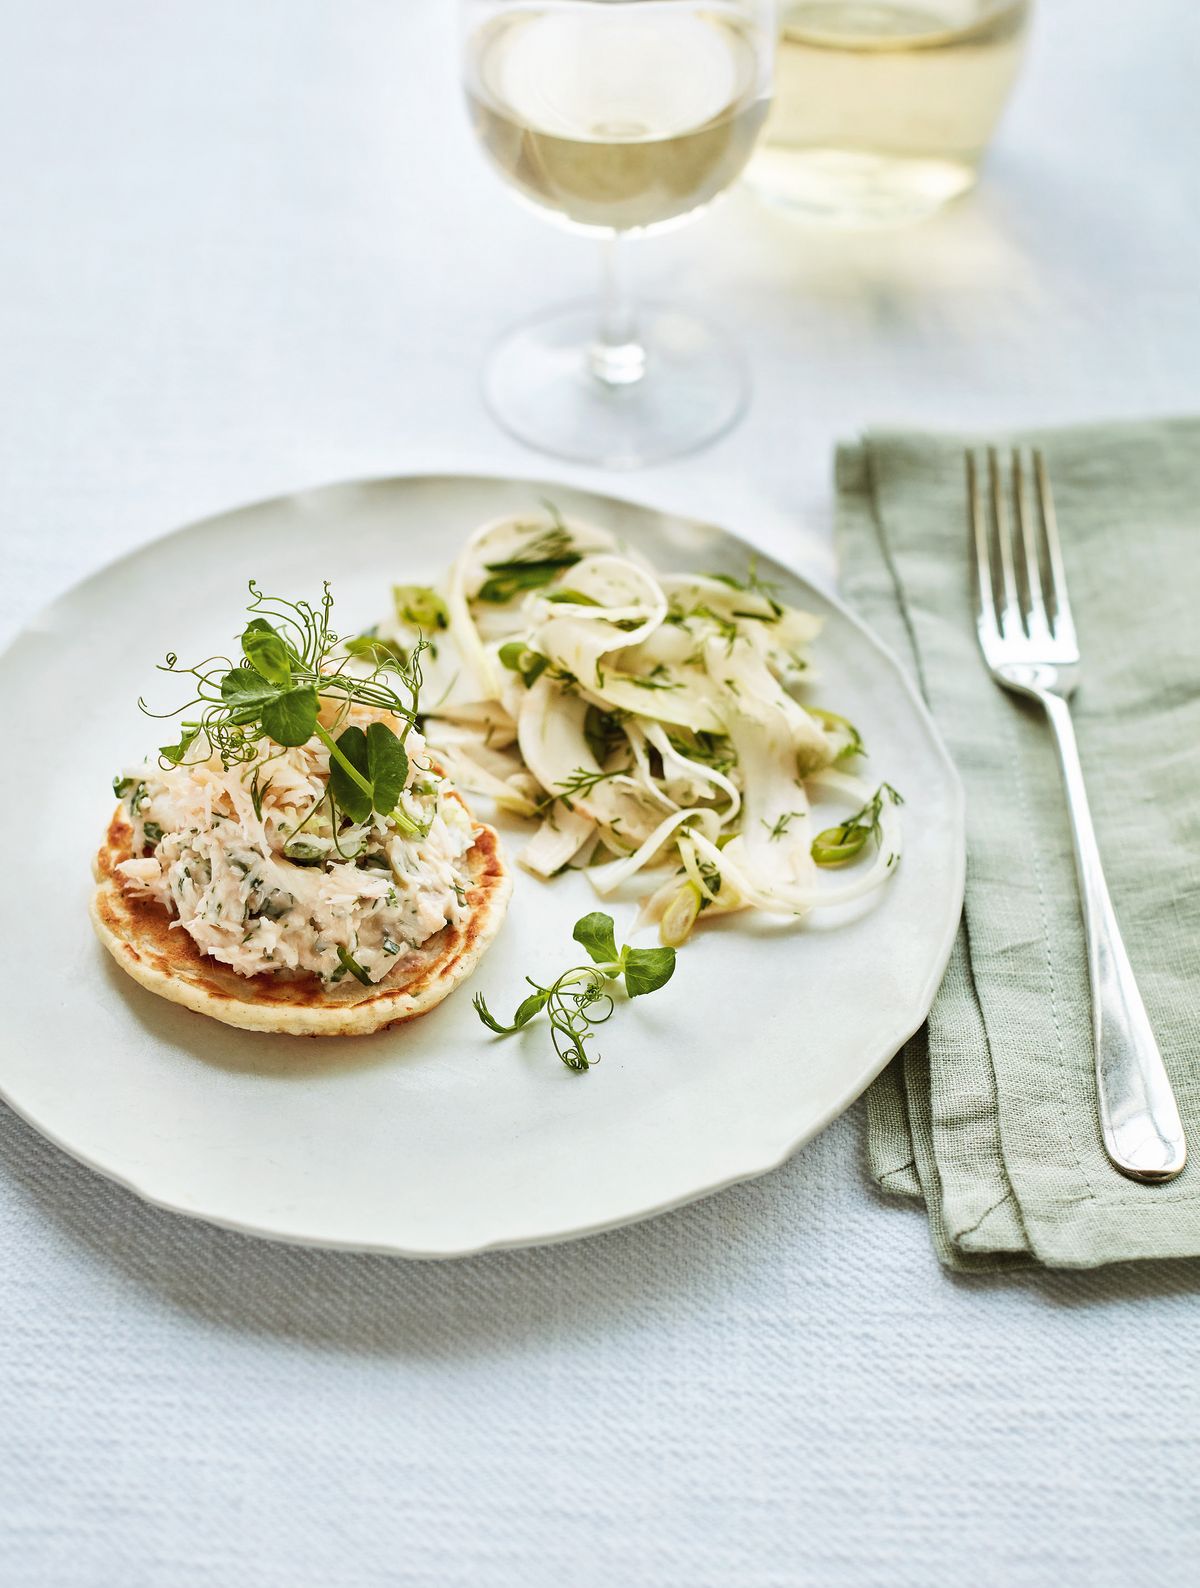 Mary Berry’s Crab and Herb Blinis with Pickled Fennel Herb Salad